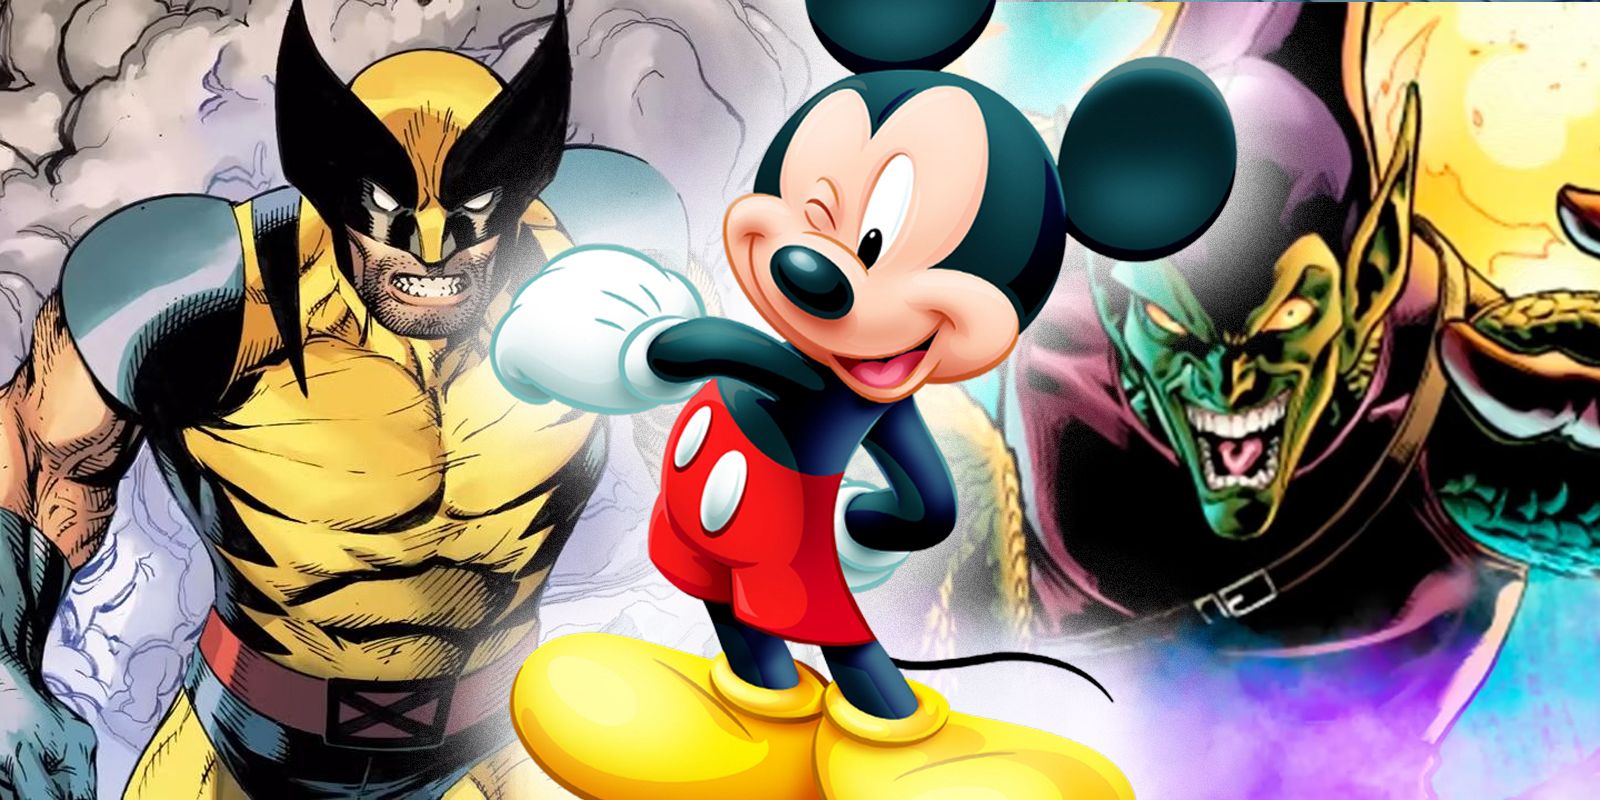 A collage featuring Marvel Comics' Wolverine and Green Goblin with Disney's Mickey Mouse inbetween them.